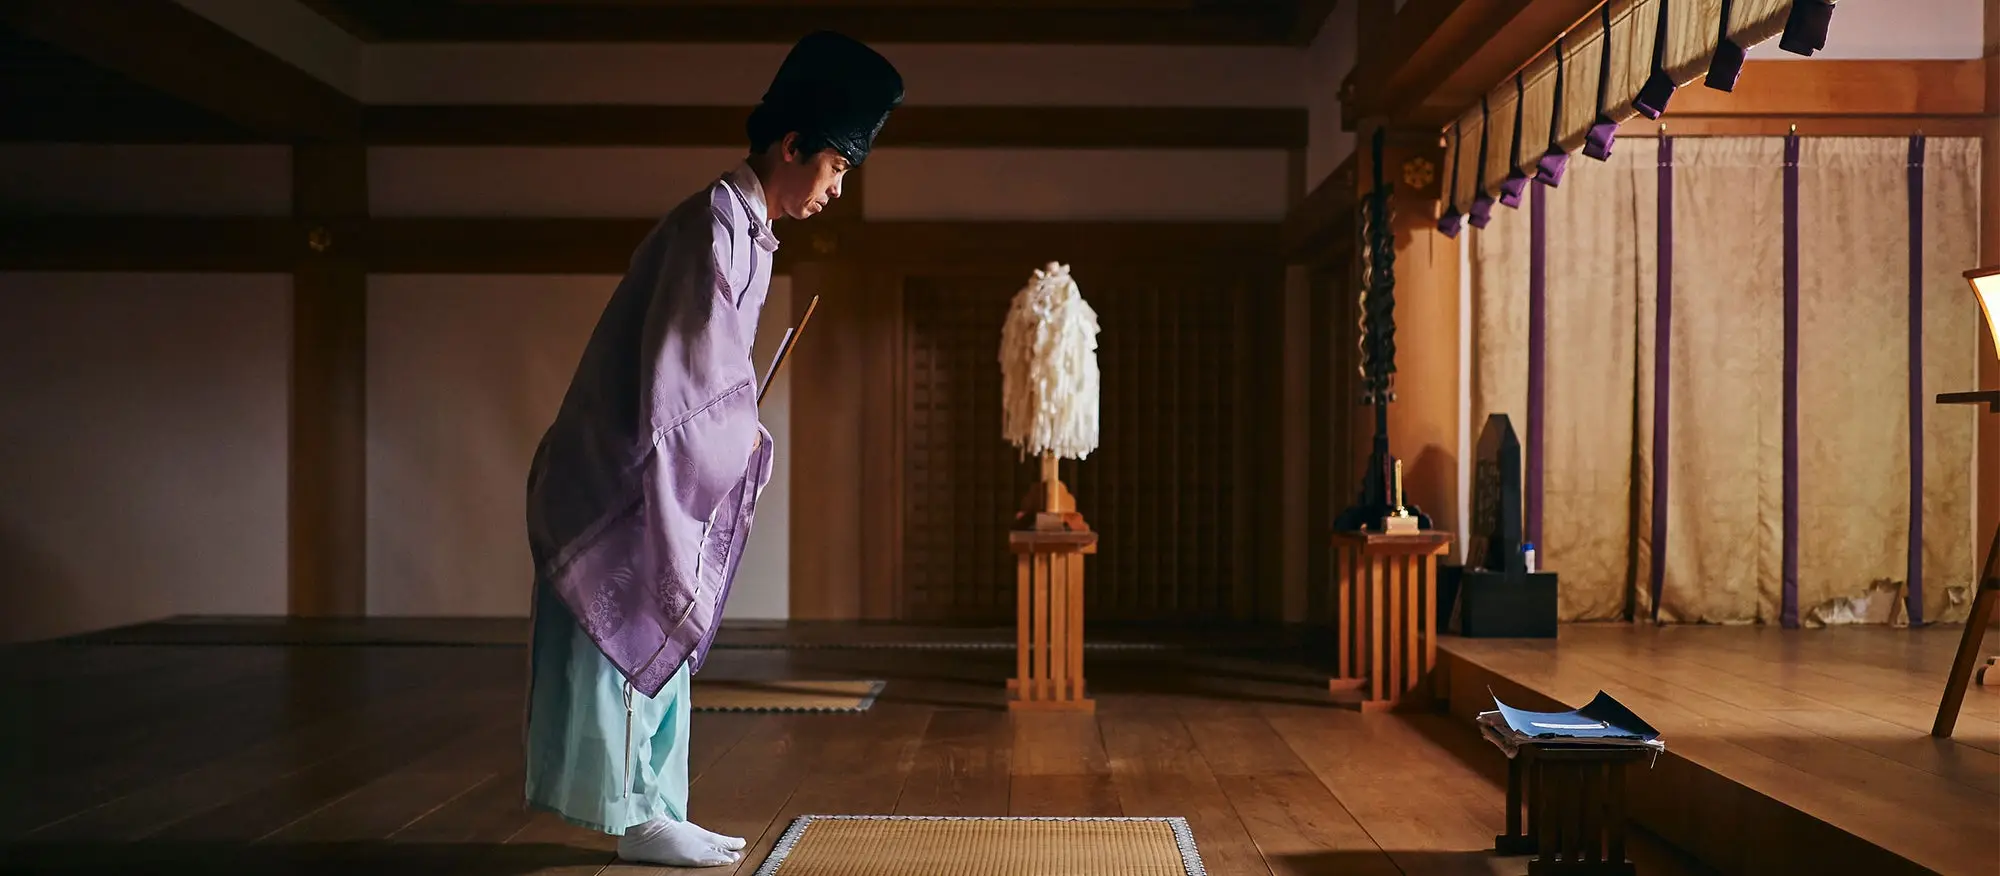 Man dressed traditionally, bowing over a mat. 